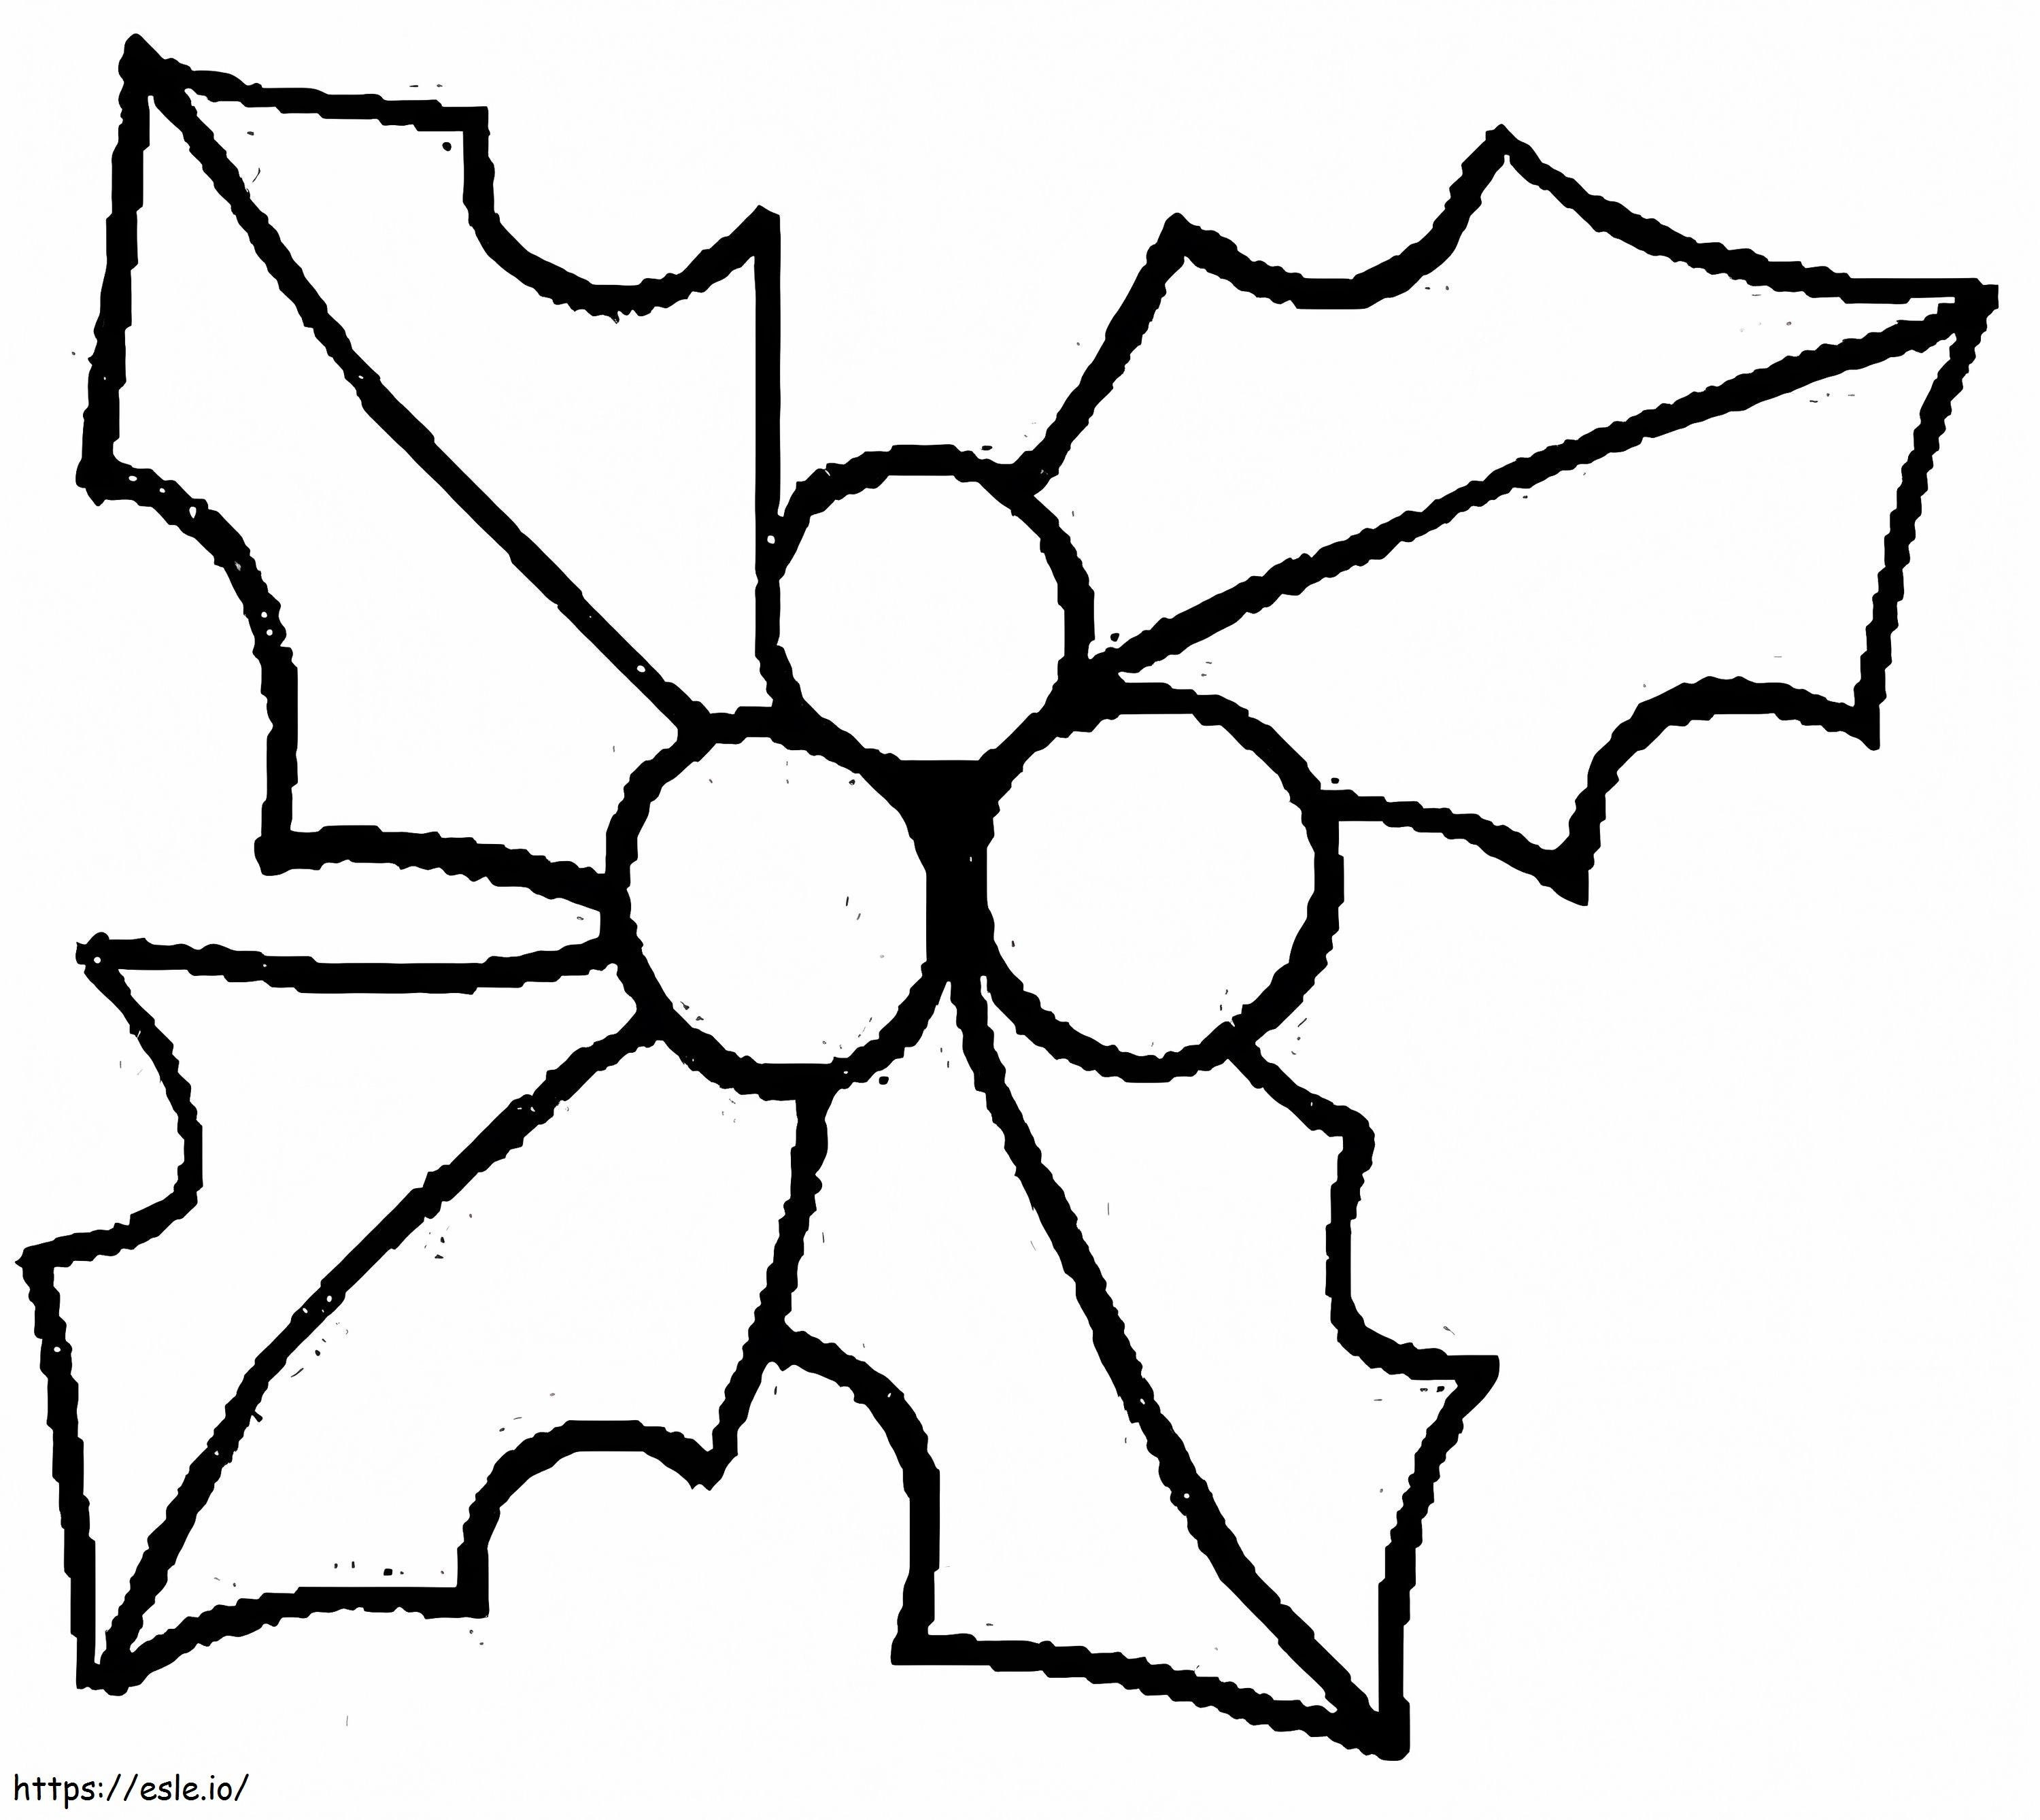 Christmas Holly 5 coloring page